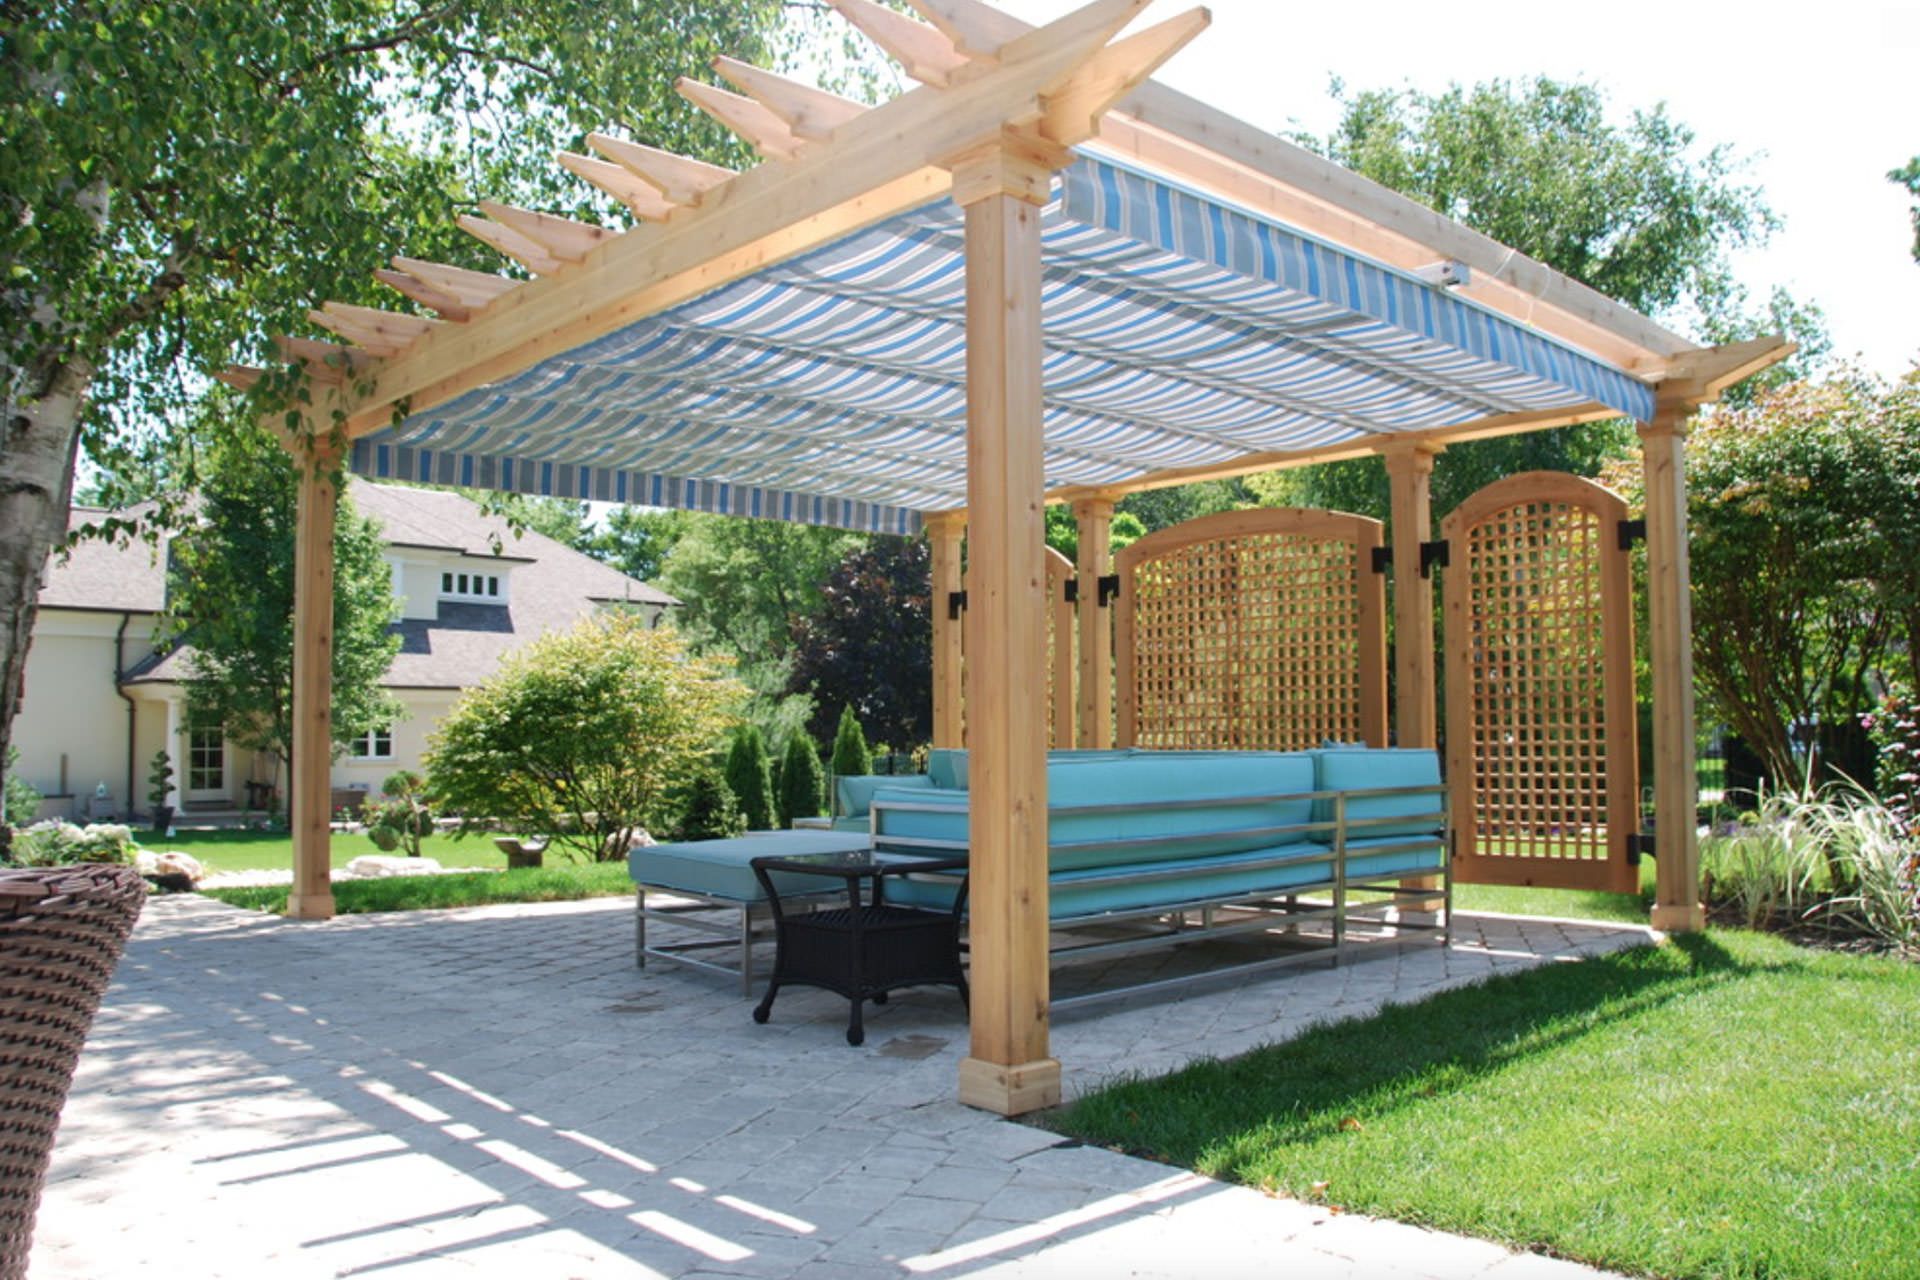 Pergola, Trellis or Arbor: How Can You Tell The Difference?